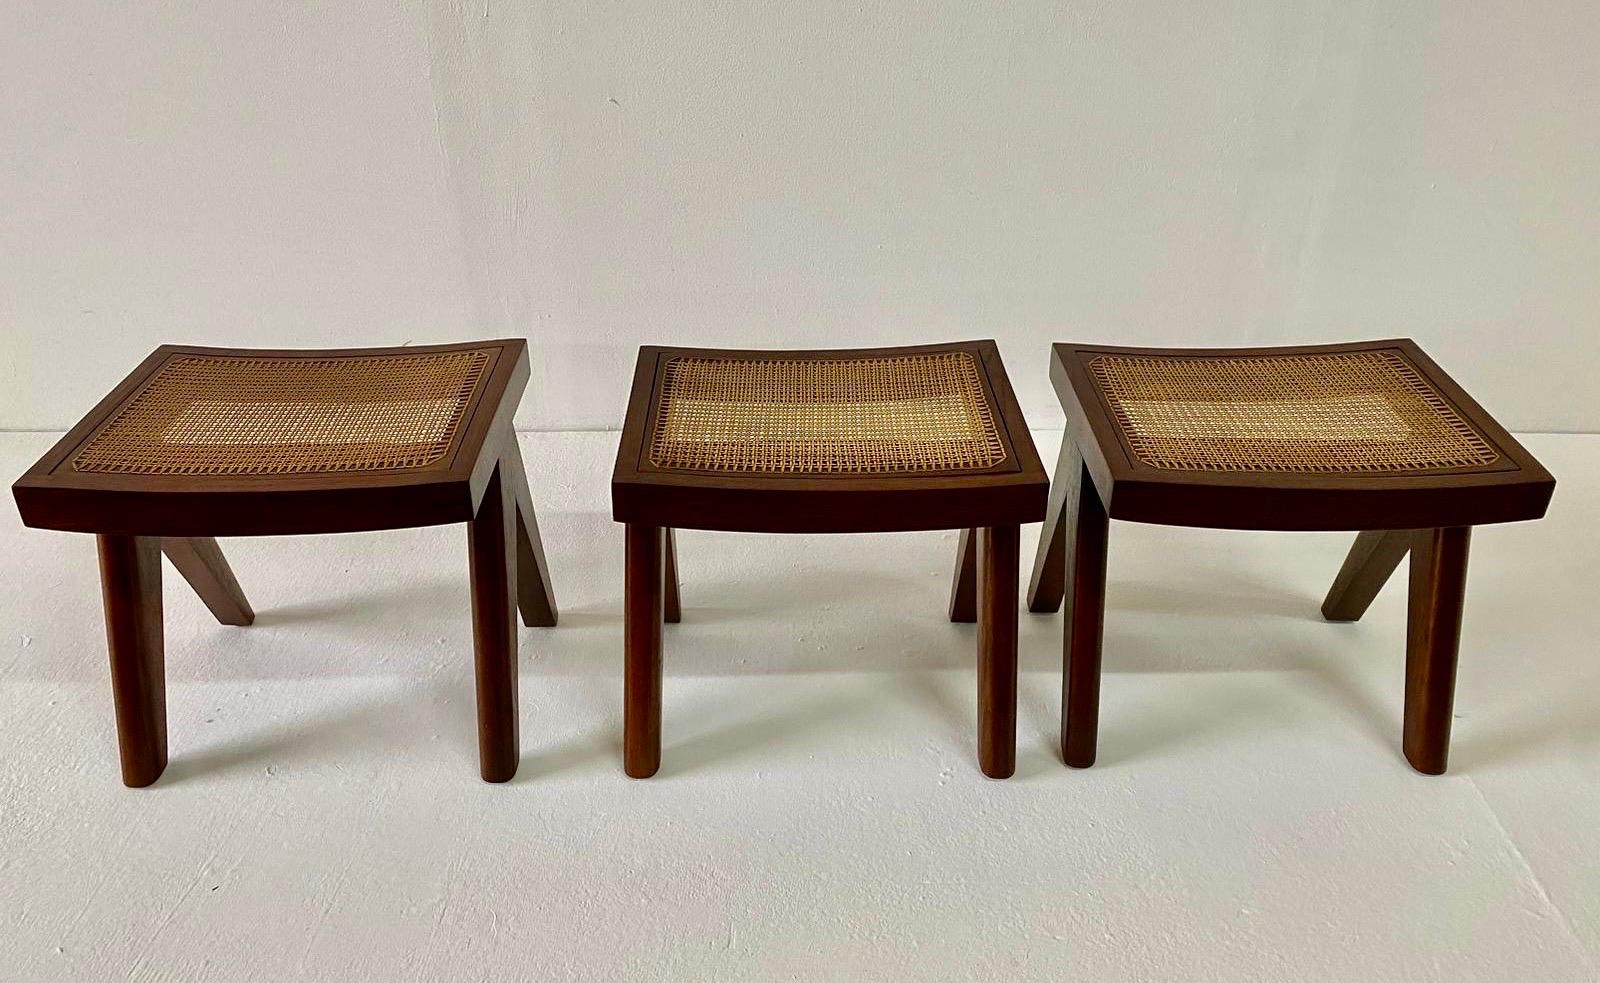 Studio Made Heavy Teak Stools - Manner of Jeanneret (2 Pairs Available) For Sale 2